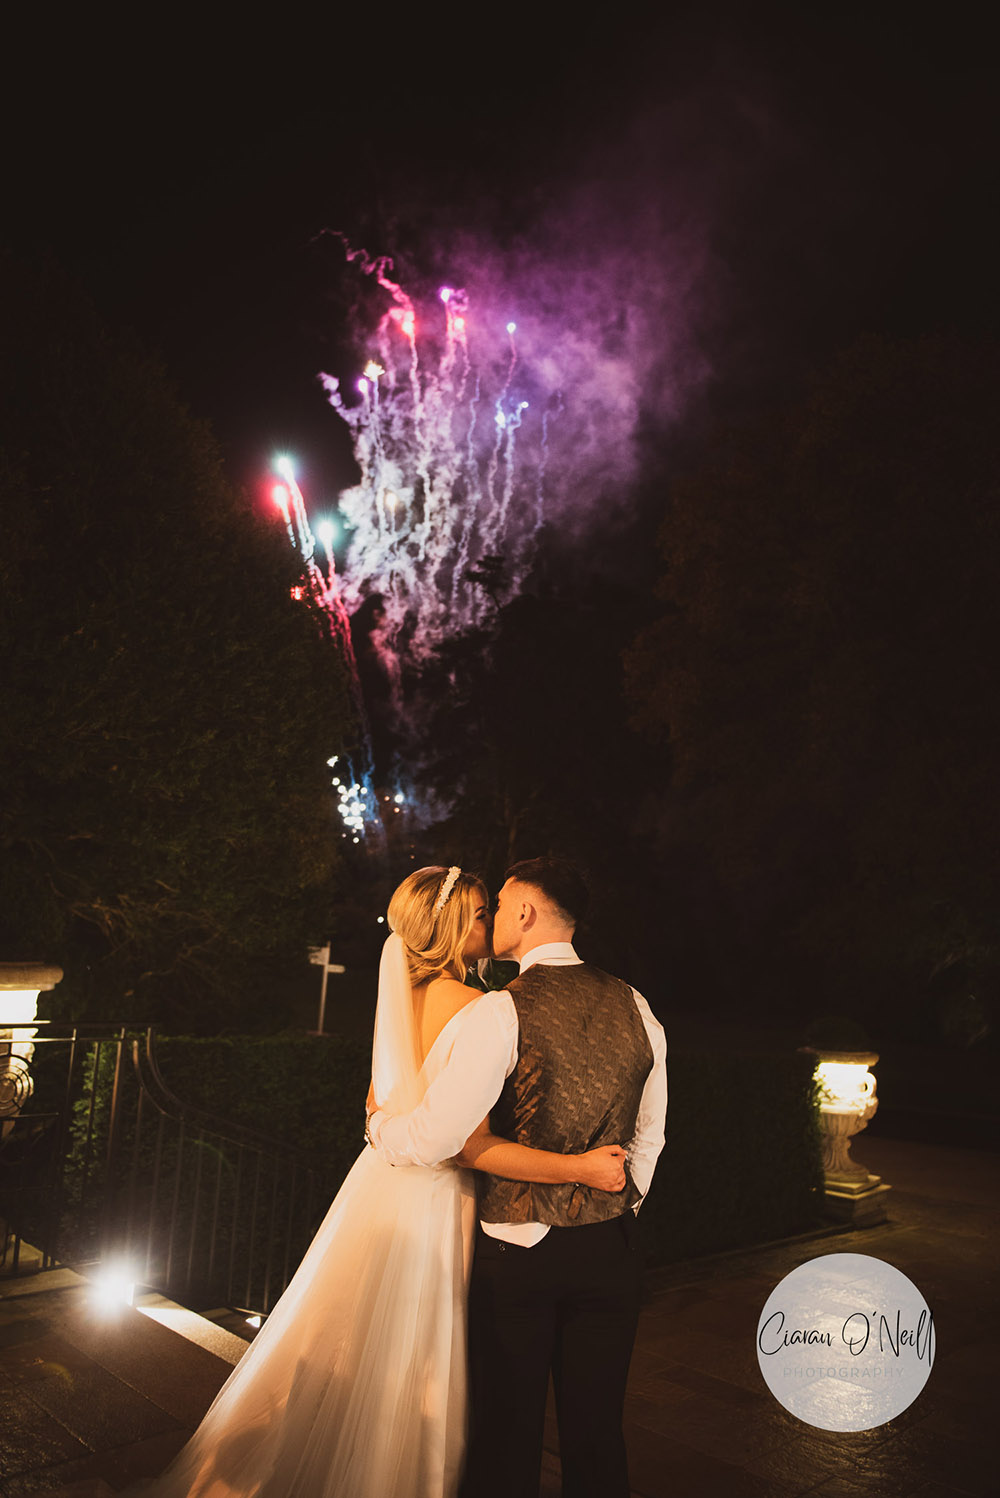 Bride and groom kissing in front of fireworks Cabra Castle Wedding Photographer Northern Ireland Ciaran O'Neill Photography